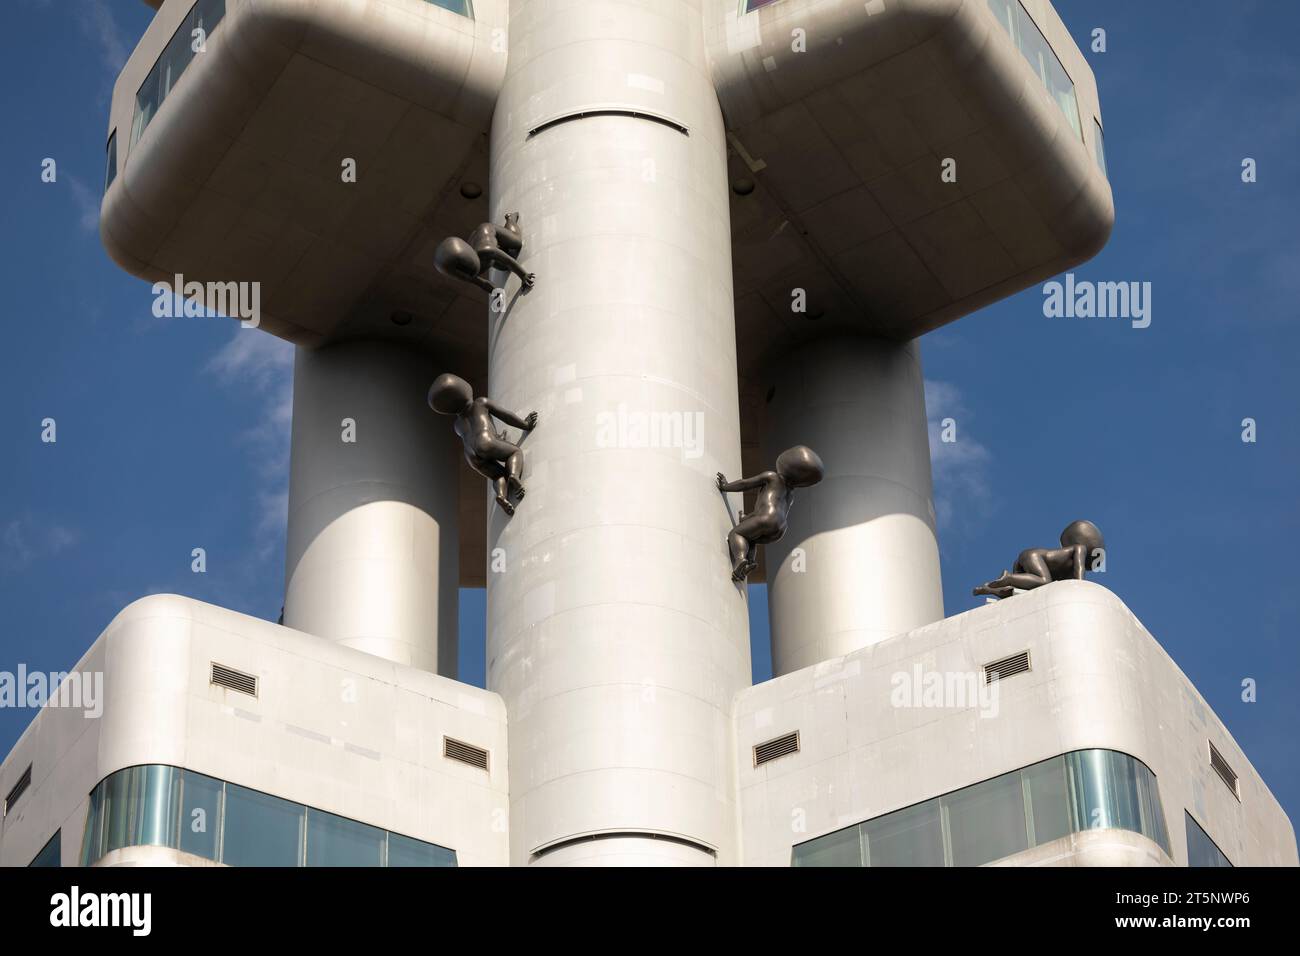 PRAGUE, CZECH REPUBLIC, EUROPE - Zizkov Television Tower, a 216m transmitter tower. On tower is sculptor David Cerny installation Babies. Stock Photo